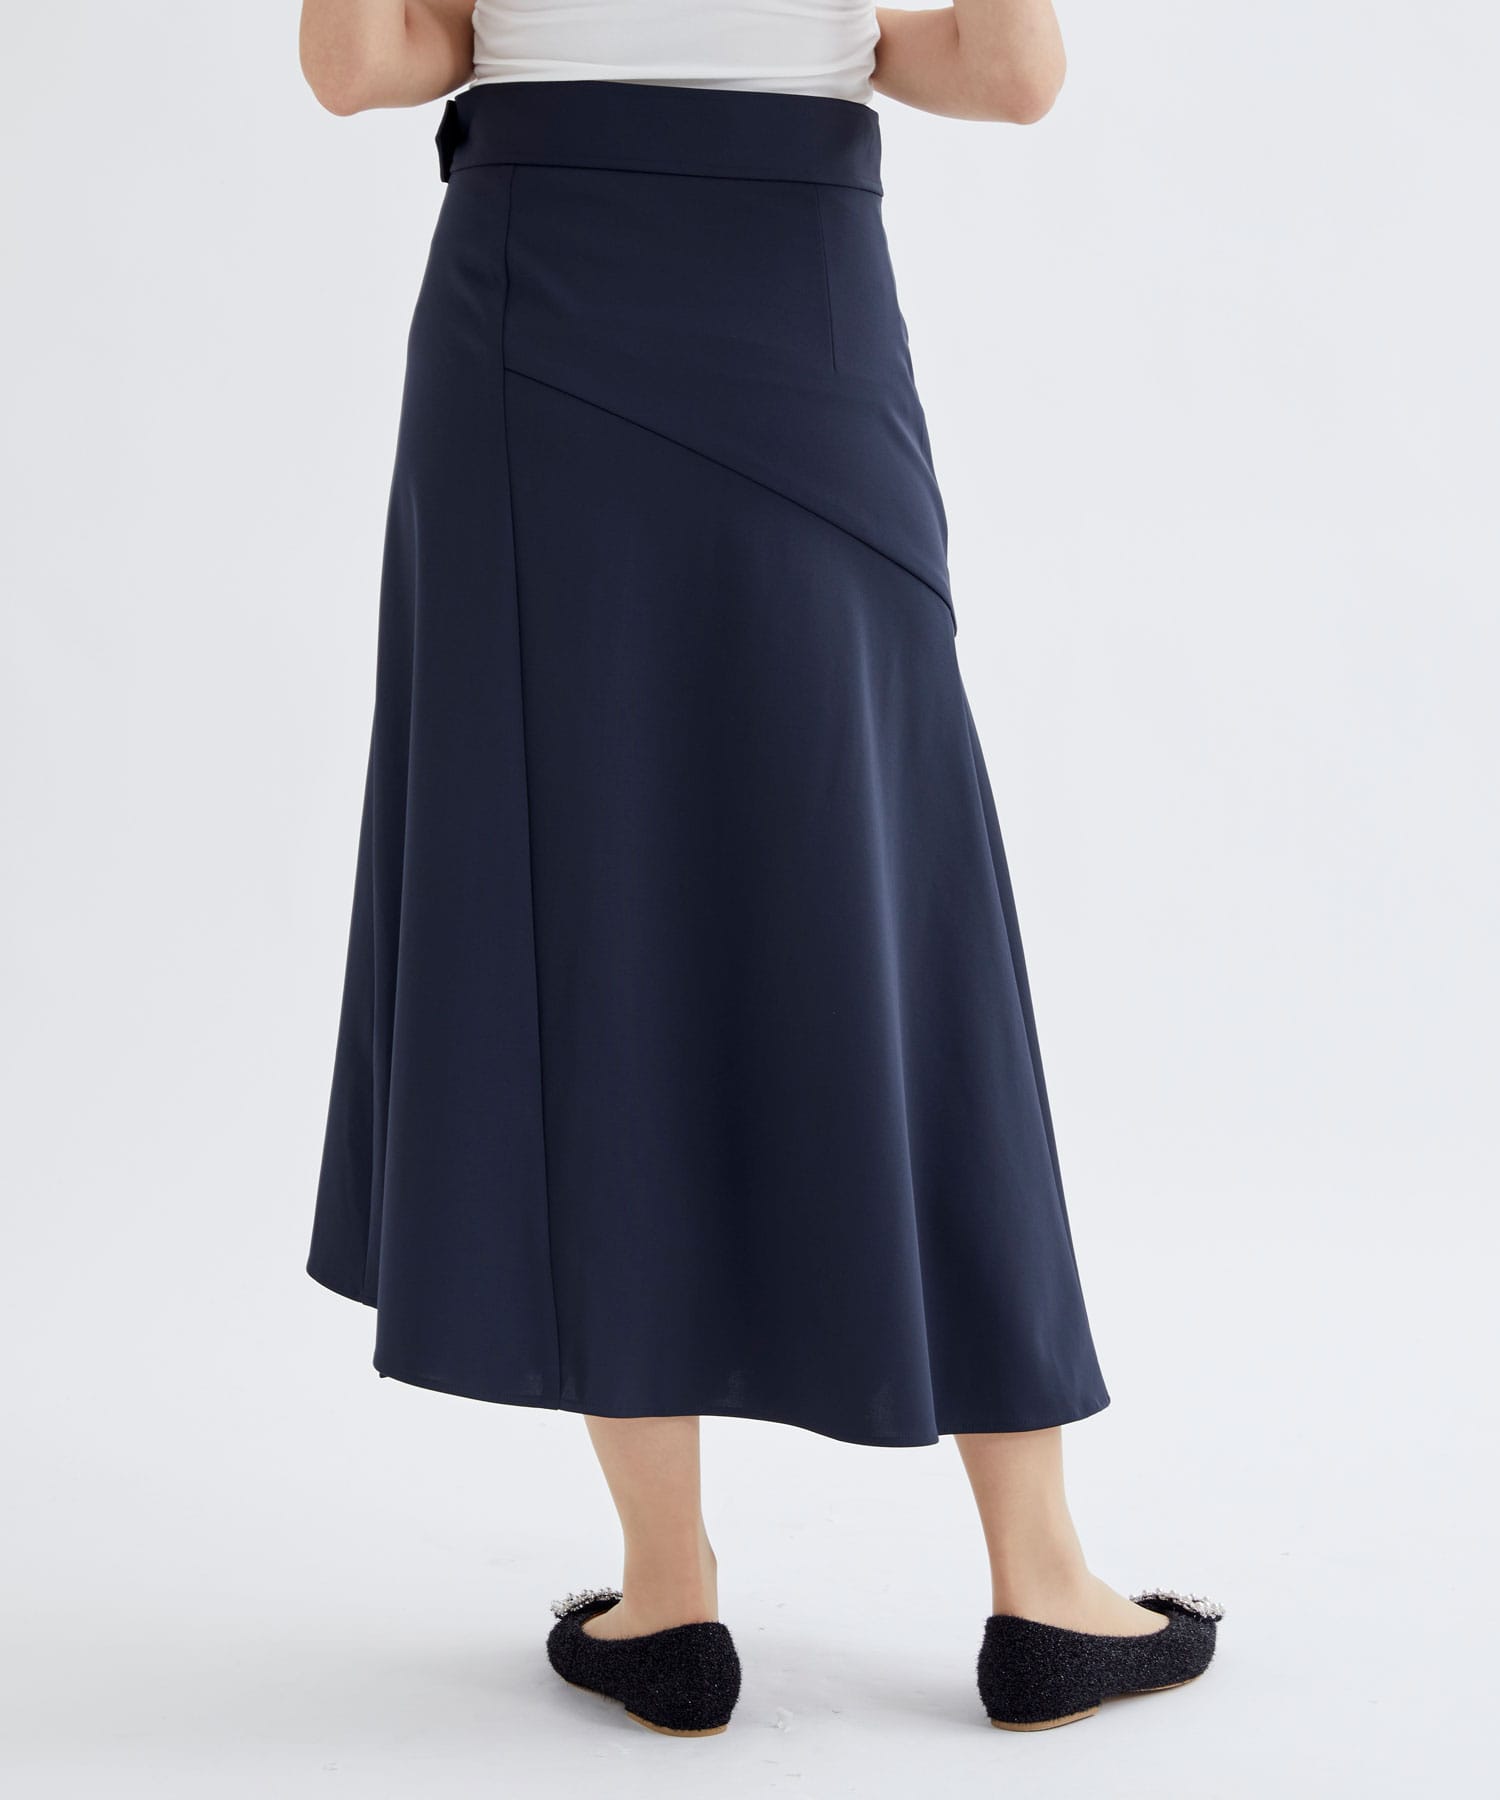 WASHABLE HIGH FANCTION JERSEY WRAP SKIRT THE PERMANENT EYE